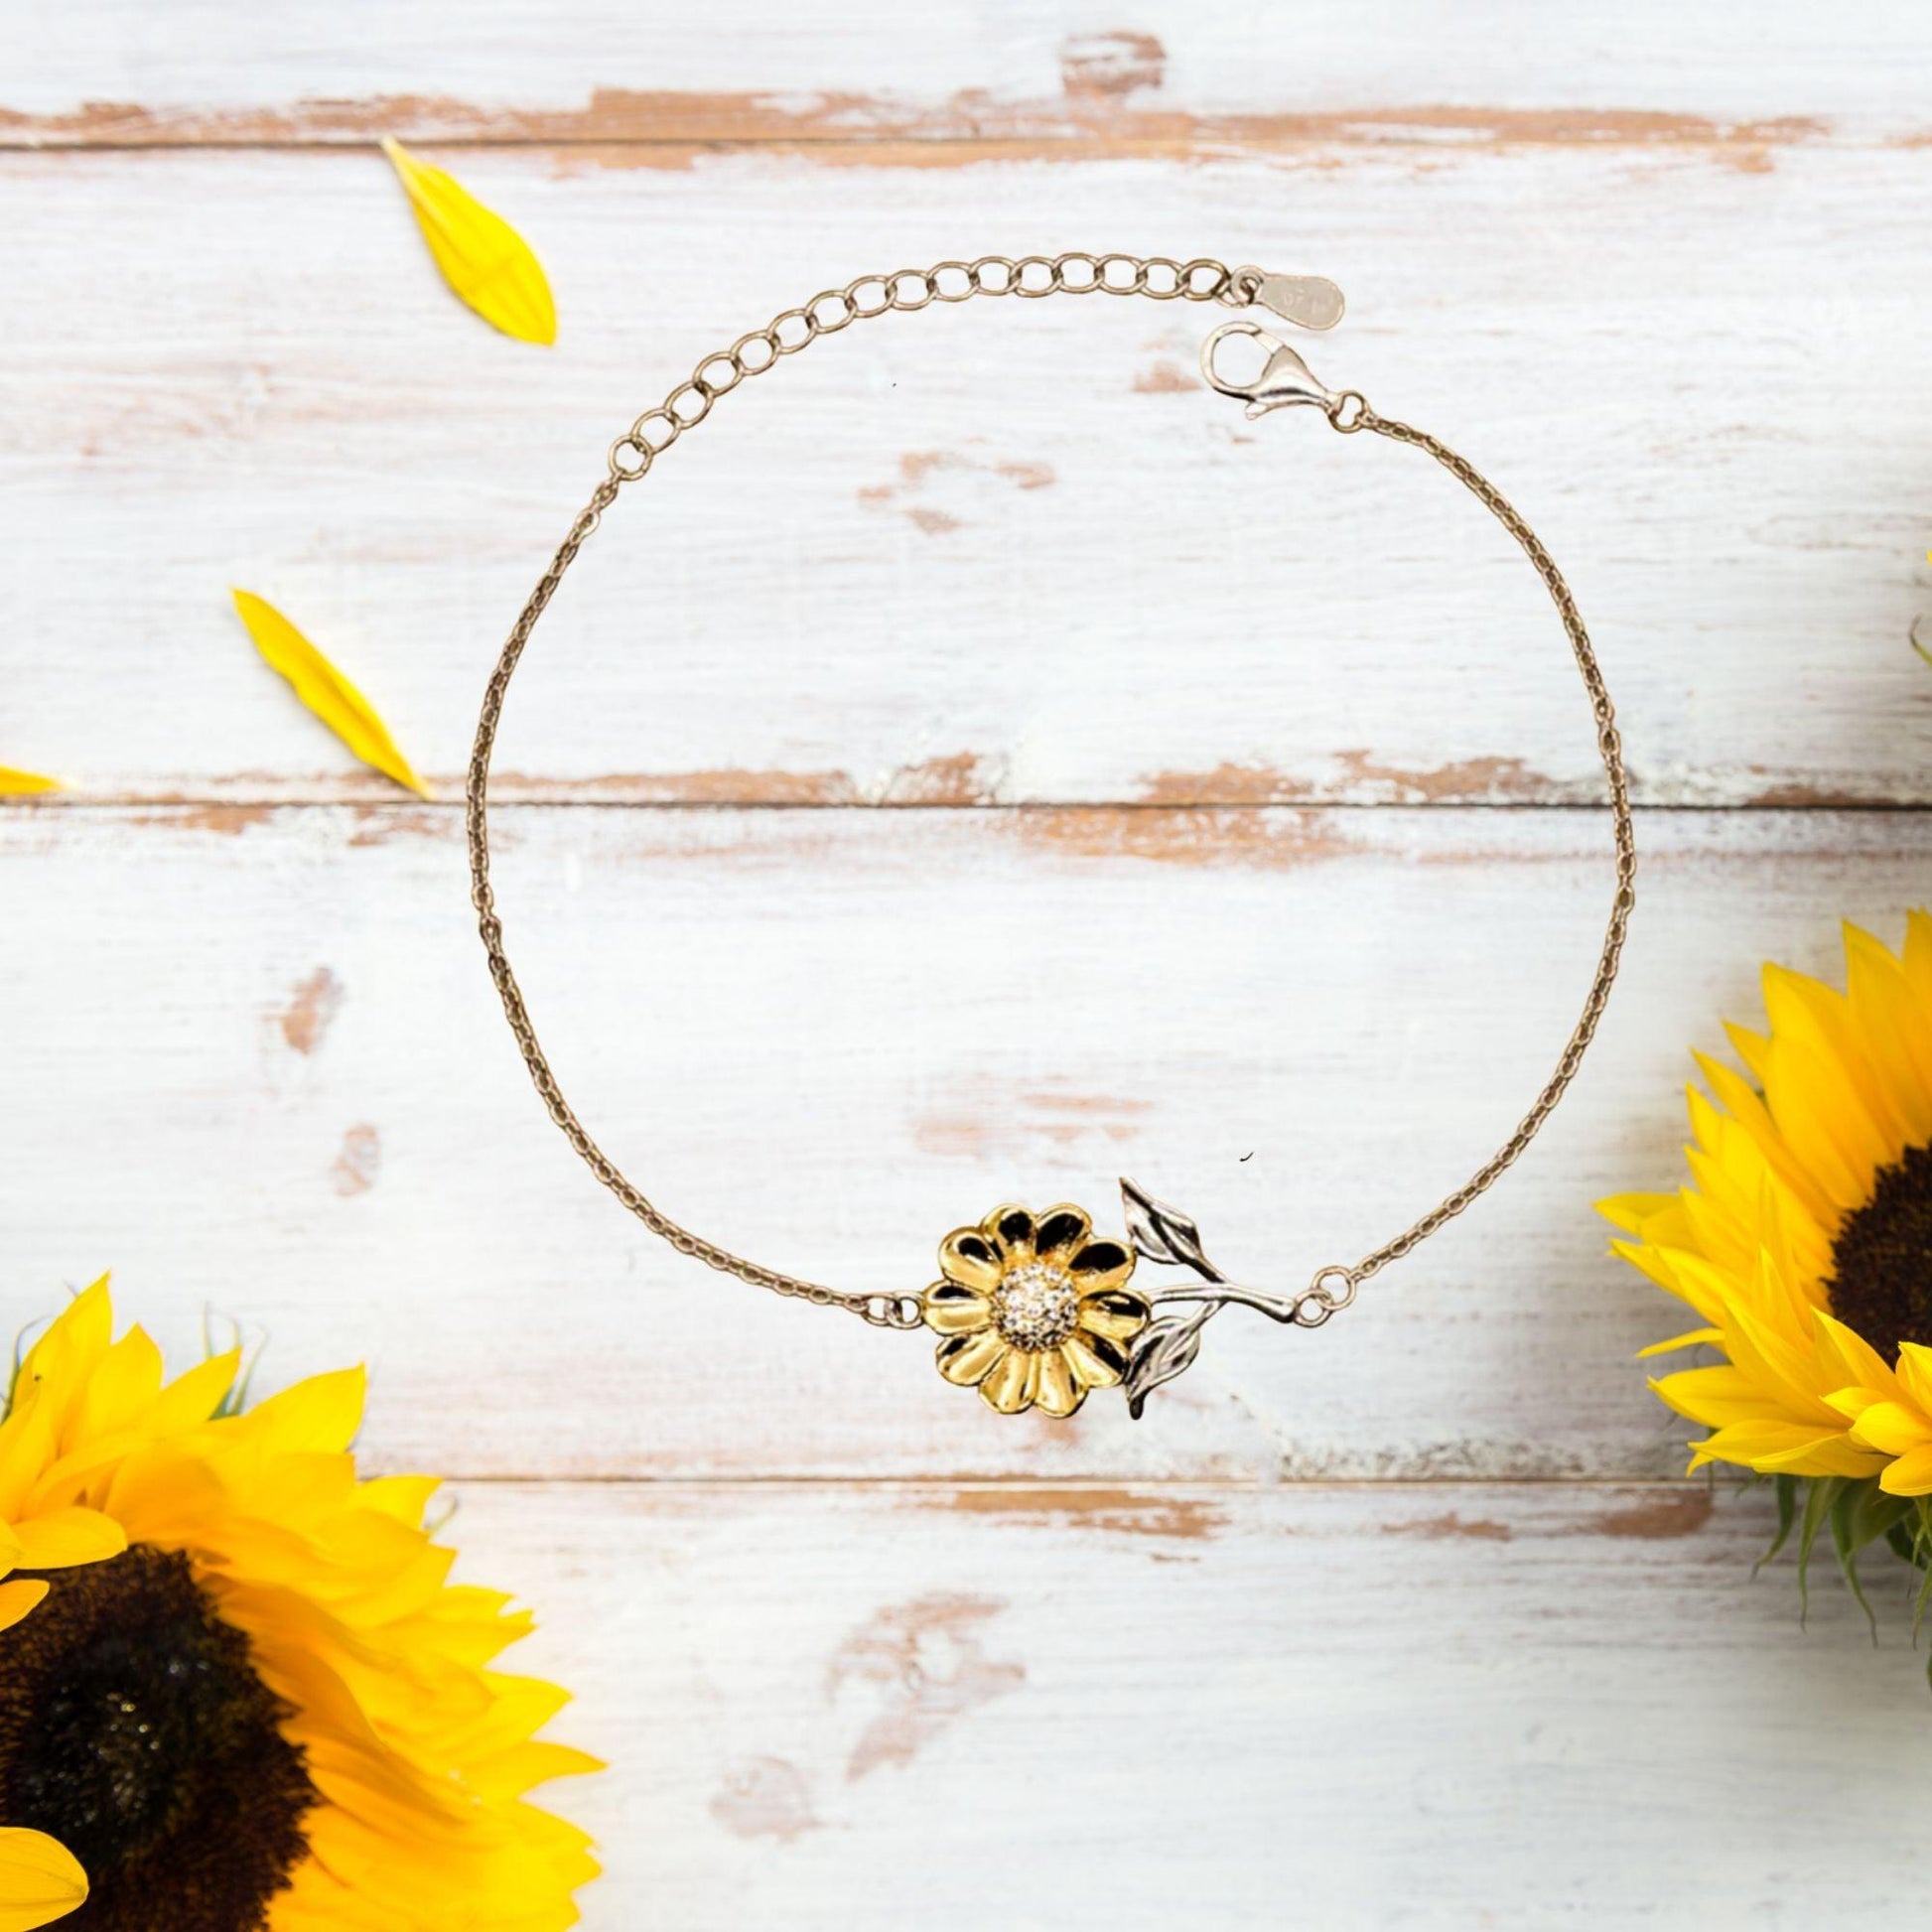 Designer Sunflower Bracelet - Thanks for being who you are - Birthday Christmas Jewelry Gifts Coworkers Colleague Boss - Mallard Moon Gift Shop